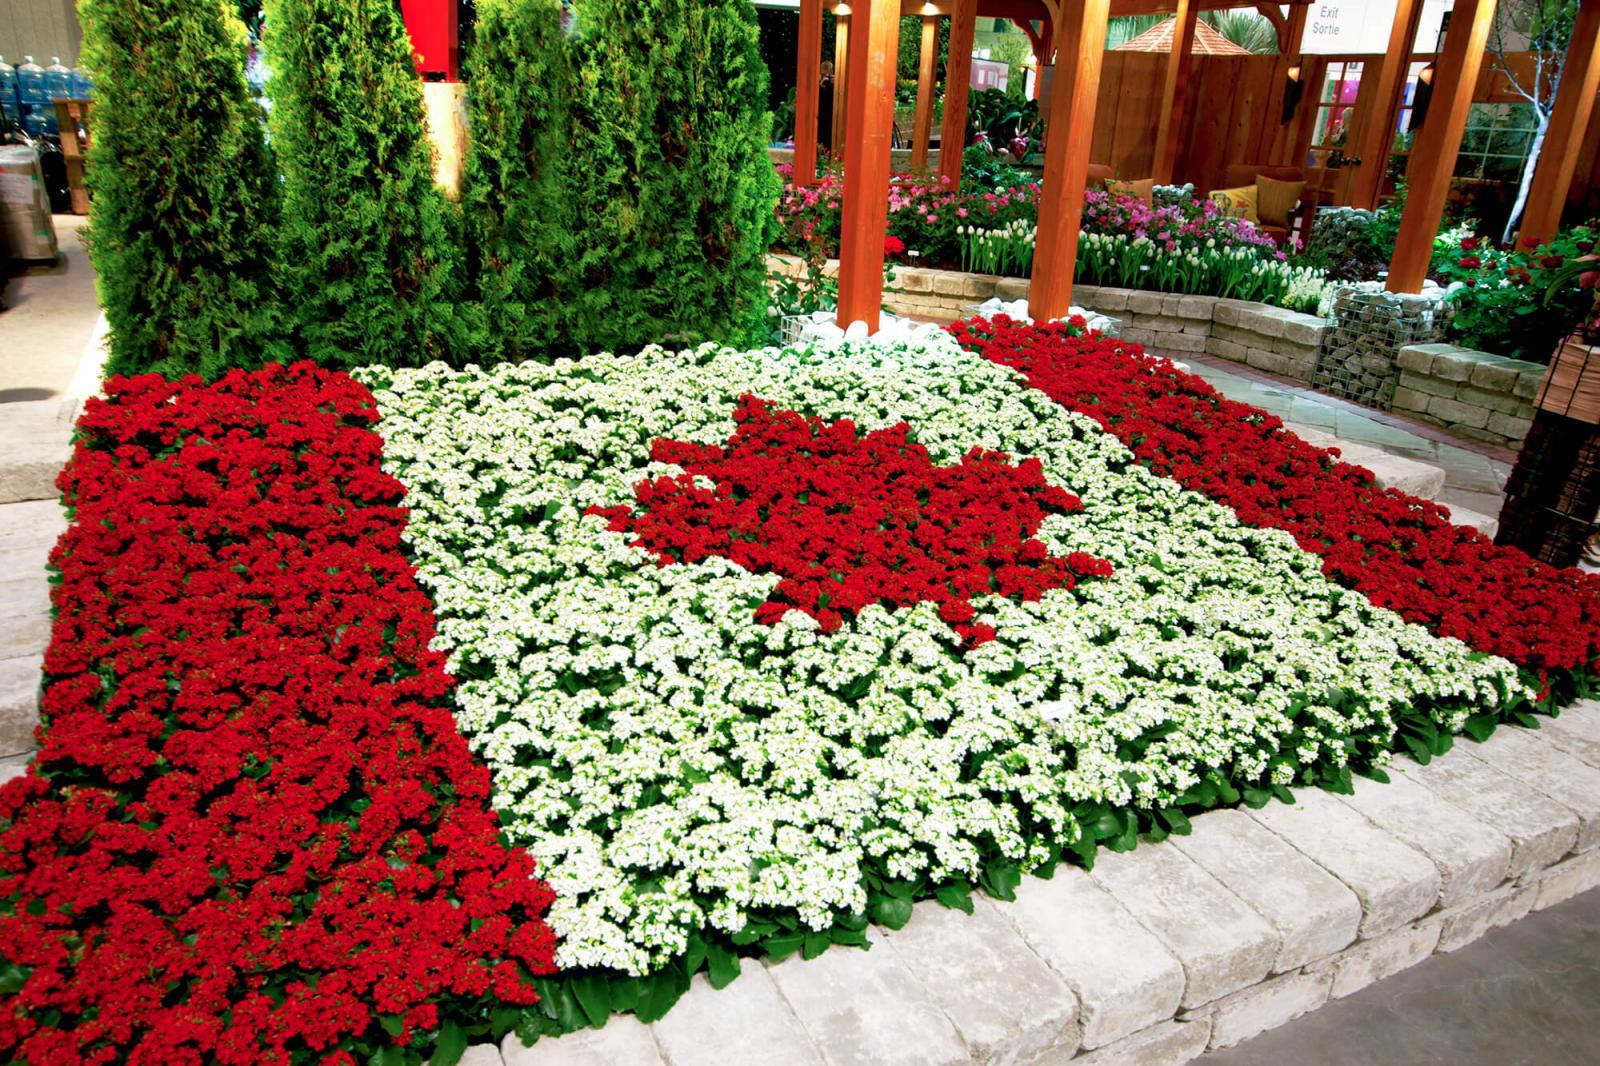 The Canadian flag created from kalanchoe grabbed a great deal of attention at LO’s feature garden at Canada Blooms.